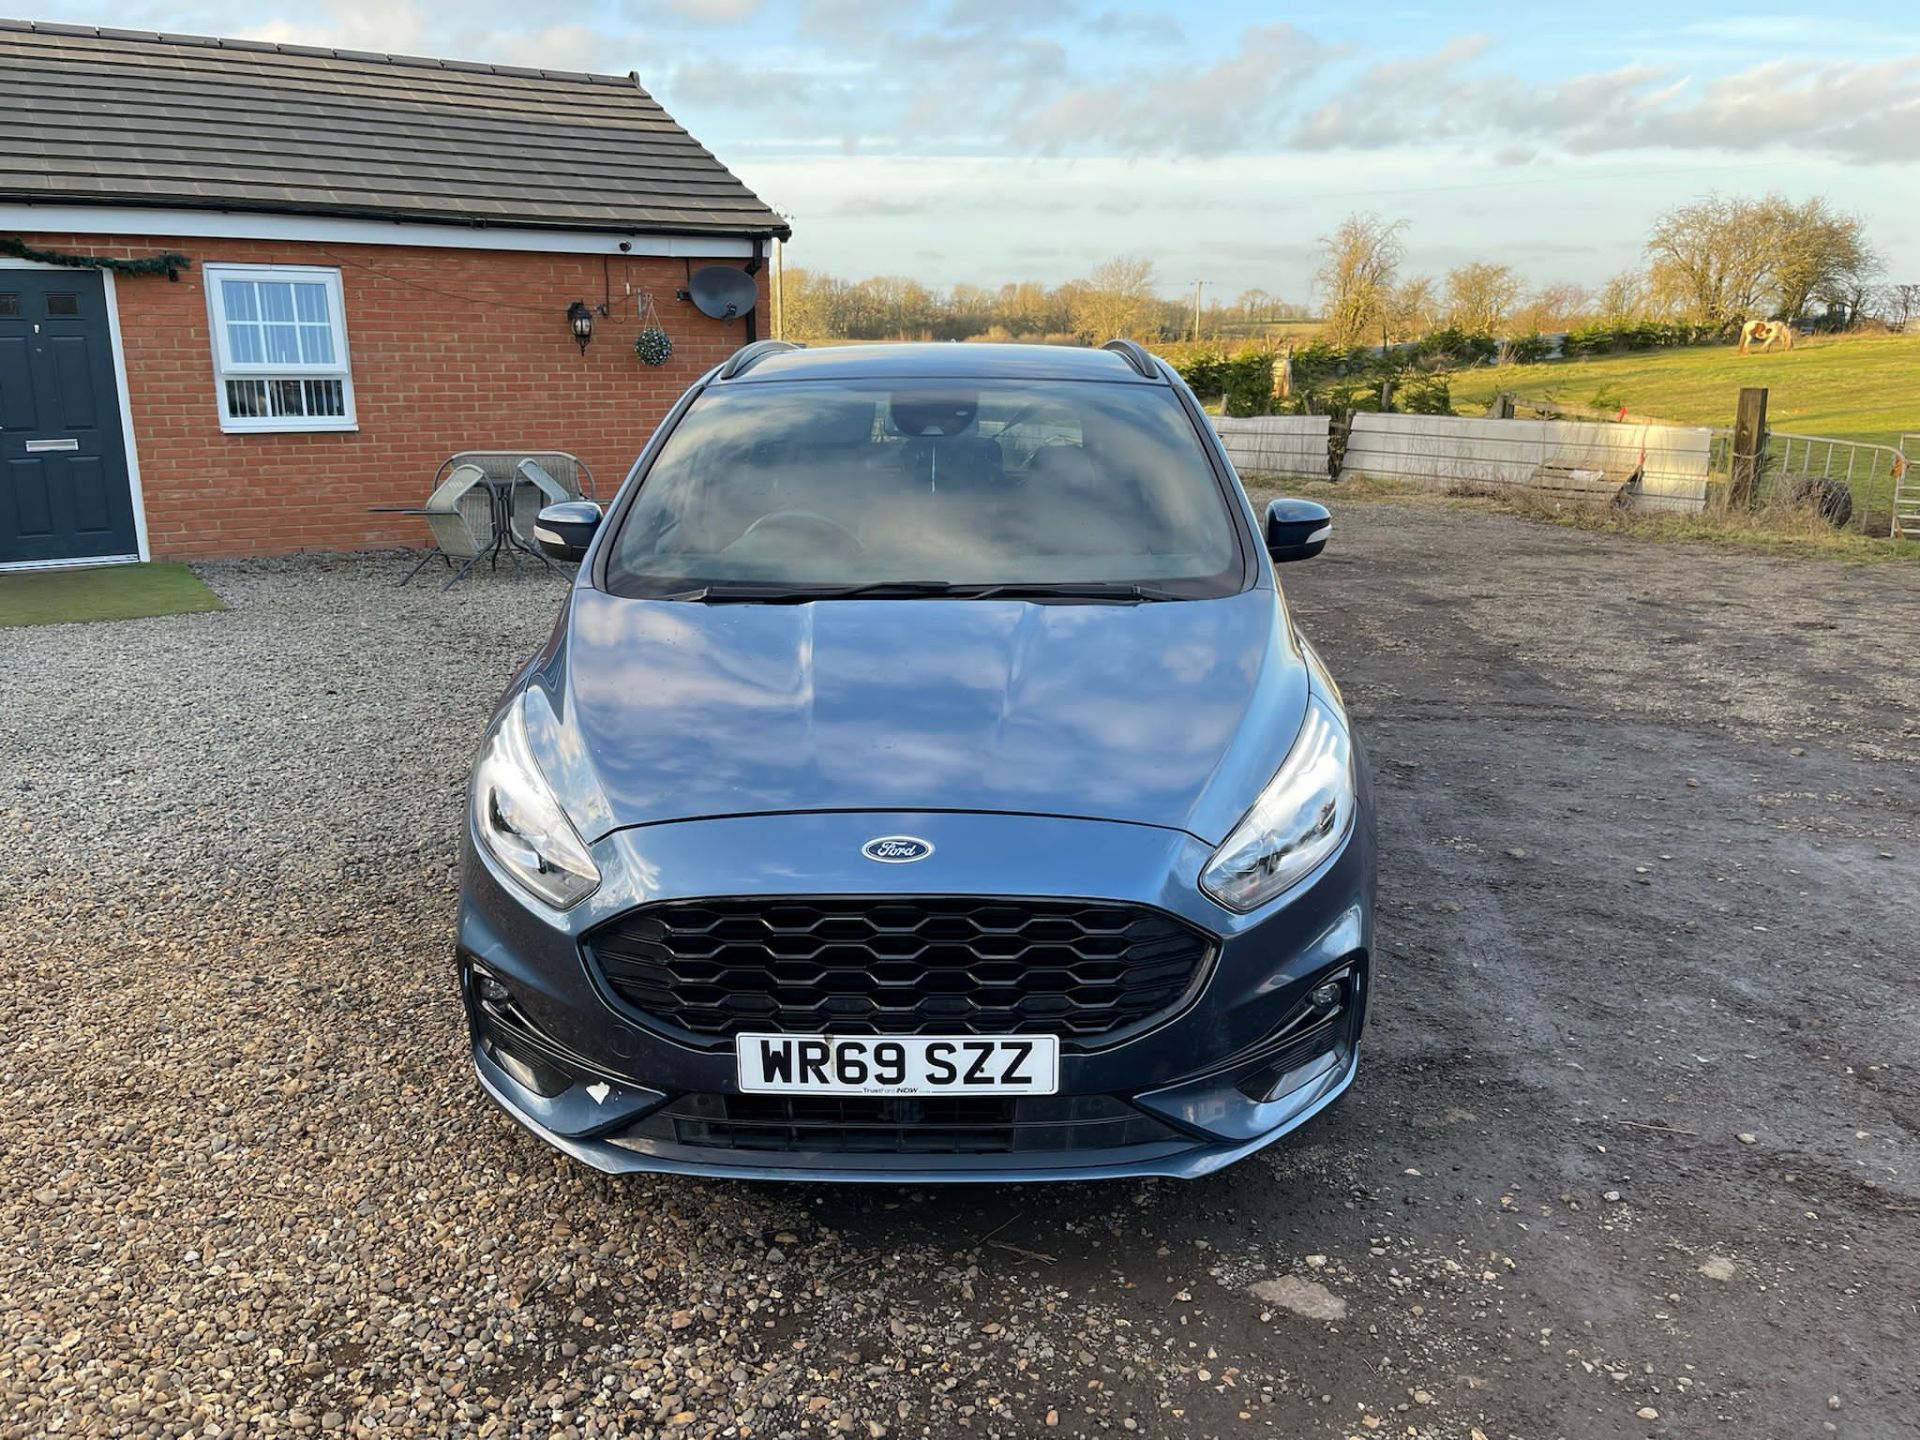 Ford s max 2019 7 seater - Image 2 of 6